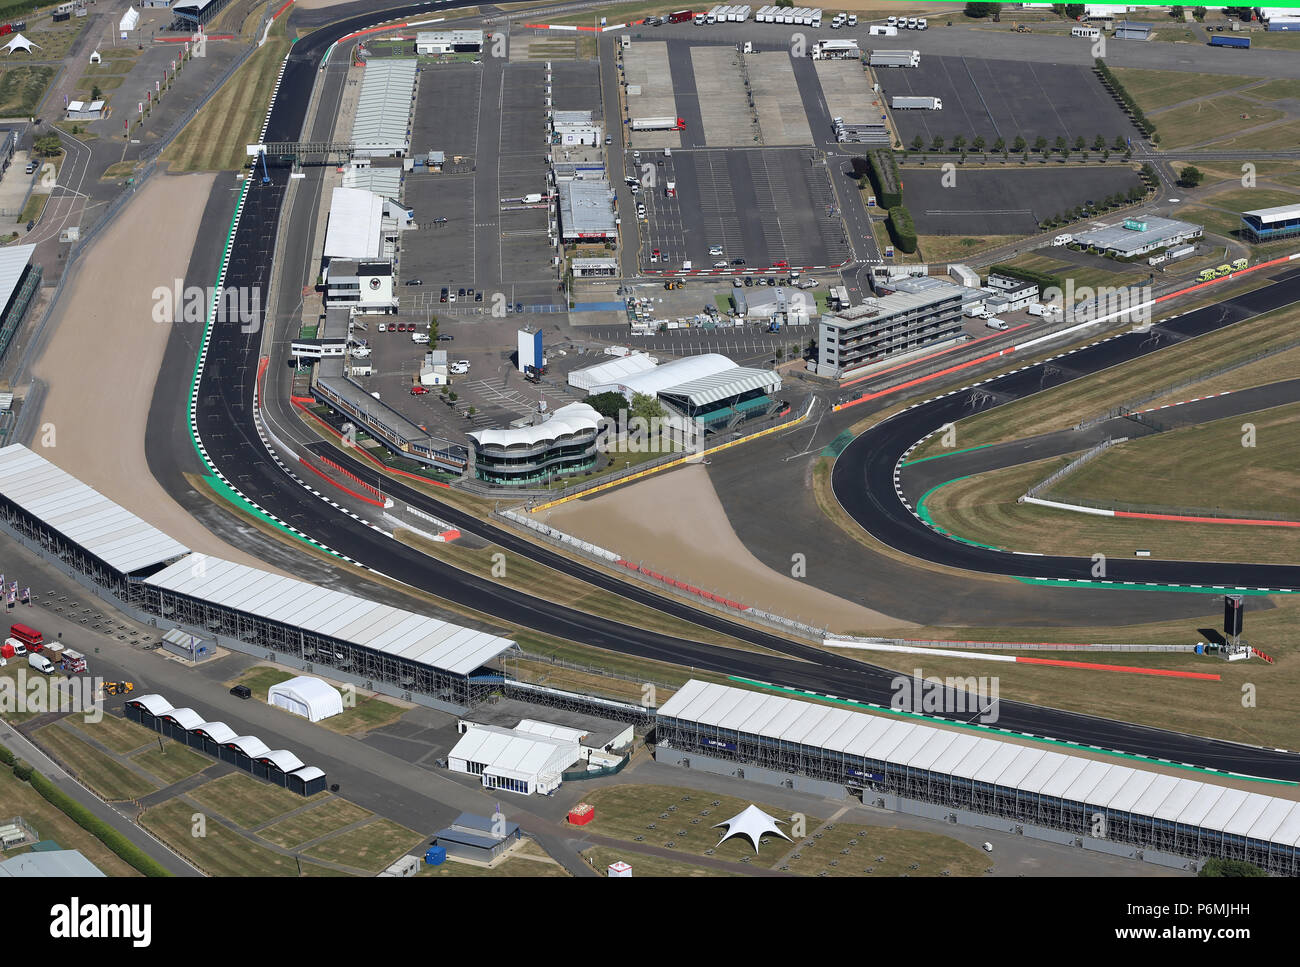 Aerial view of Silverstone Motor Racing Circuit, one week before the 2018 British Grand Prix Stock Photo